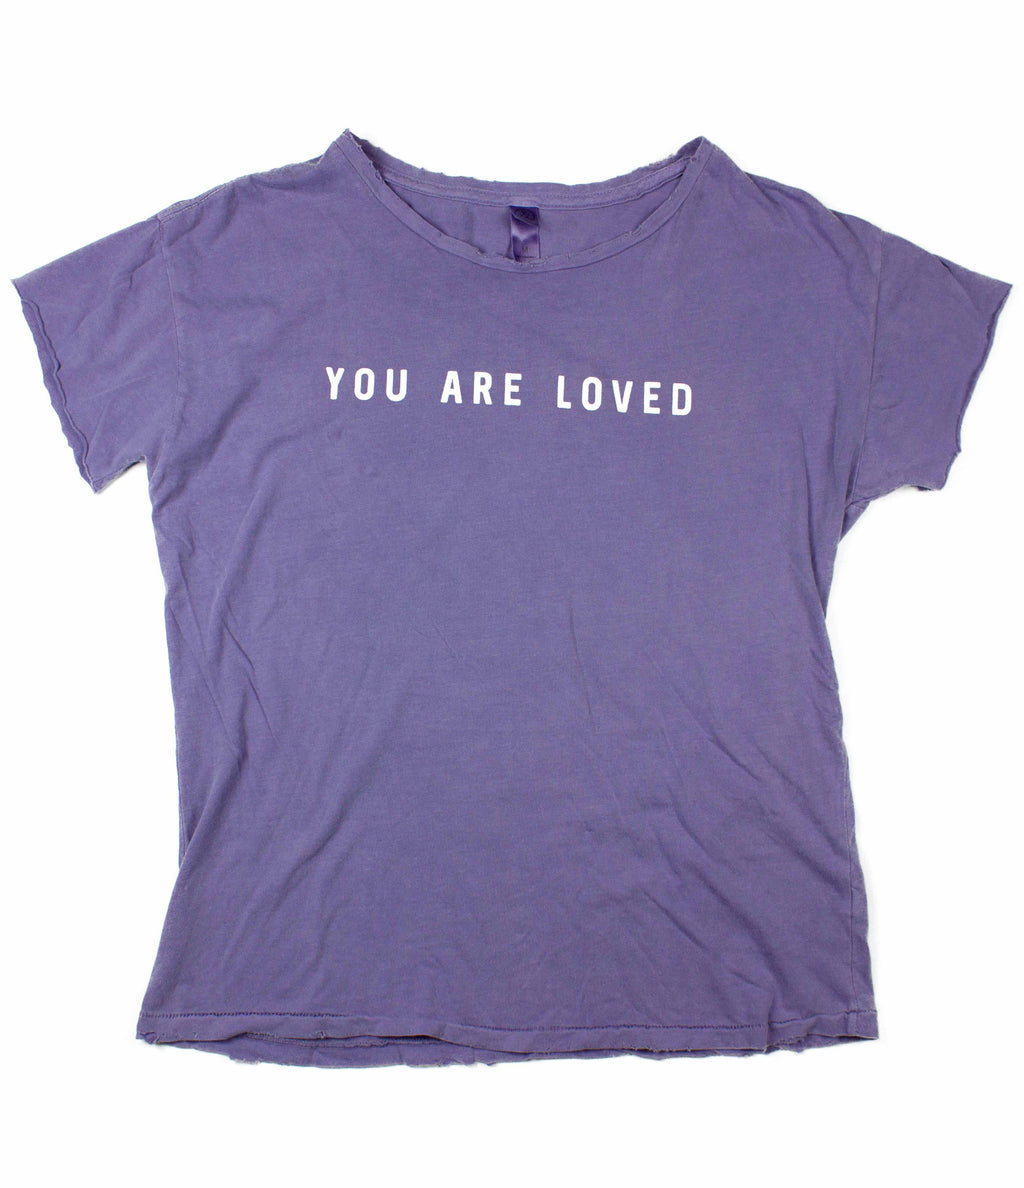 YOU ARE LOVED LILAC DISTRESSED WOMEN'S FITTED T-SHIRT